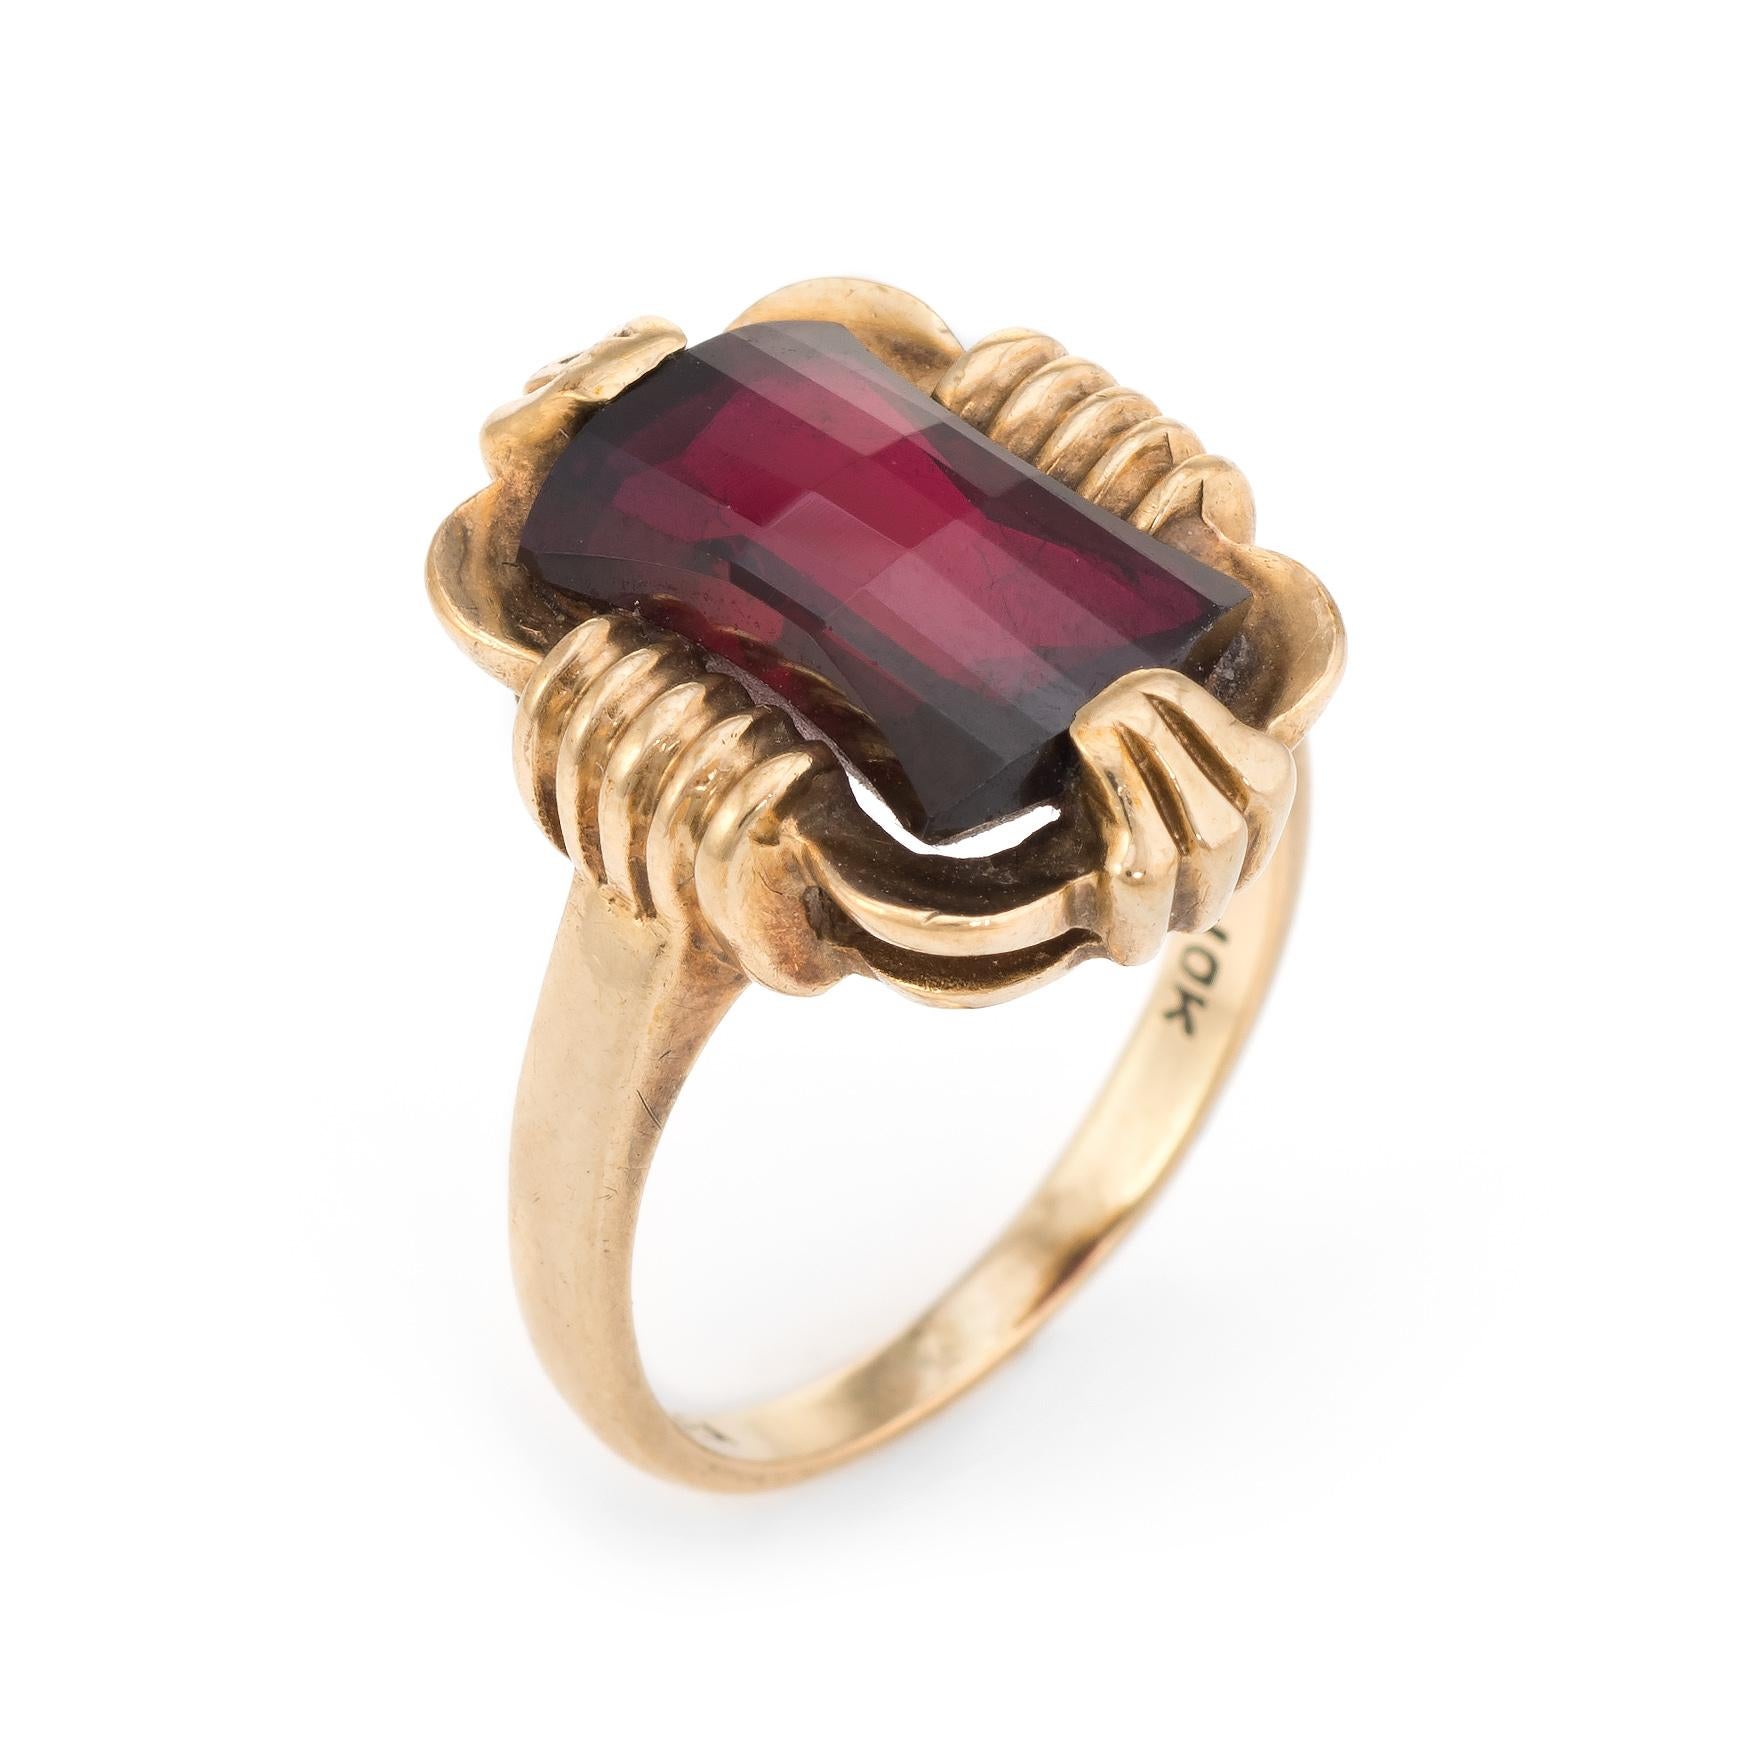 Elegant vintage cocktail ring, crafted in 10 karat yellow gold. Pre Owned 5

Faceted garnet measures 11mm x 6.5mm (estimated at 3 carats). The garnet is in excellent condition and free of cracks or chips.   

The ring is in excellent condition.